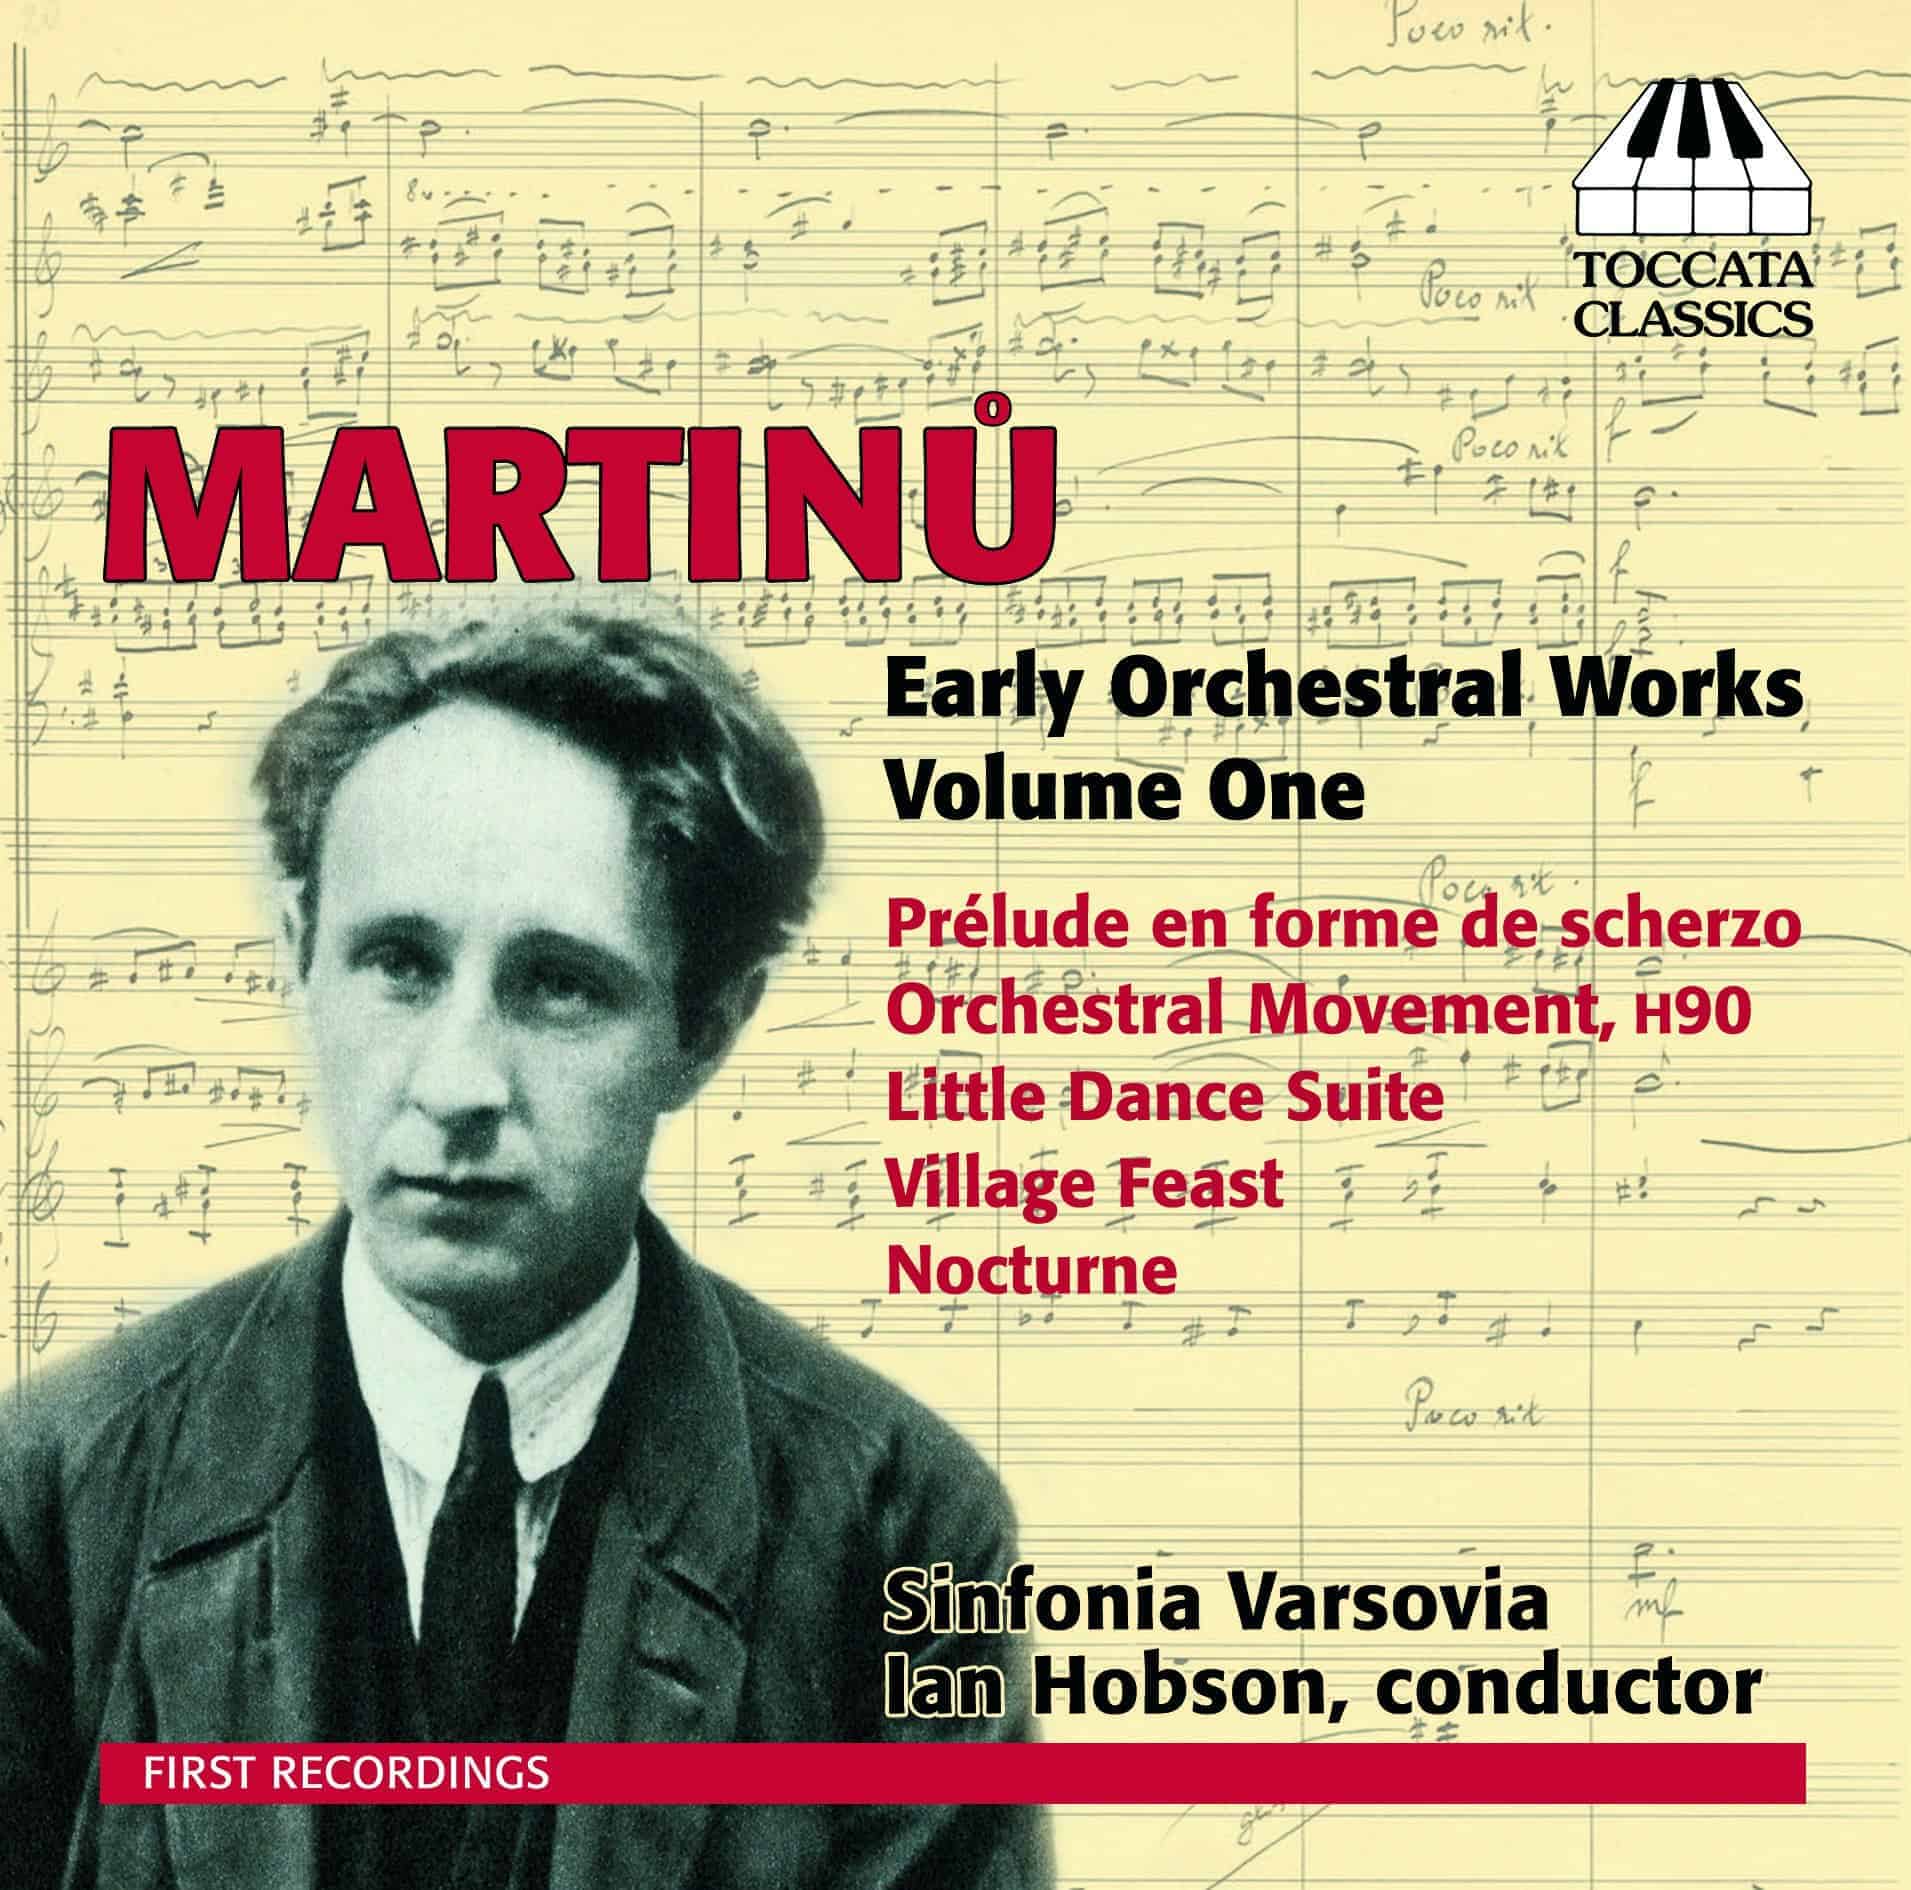 Martinu - Early Orchestral Works Volume One